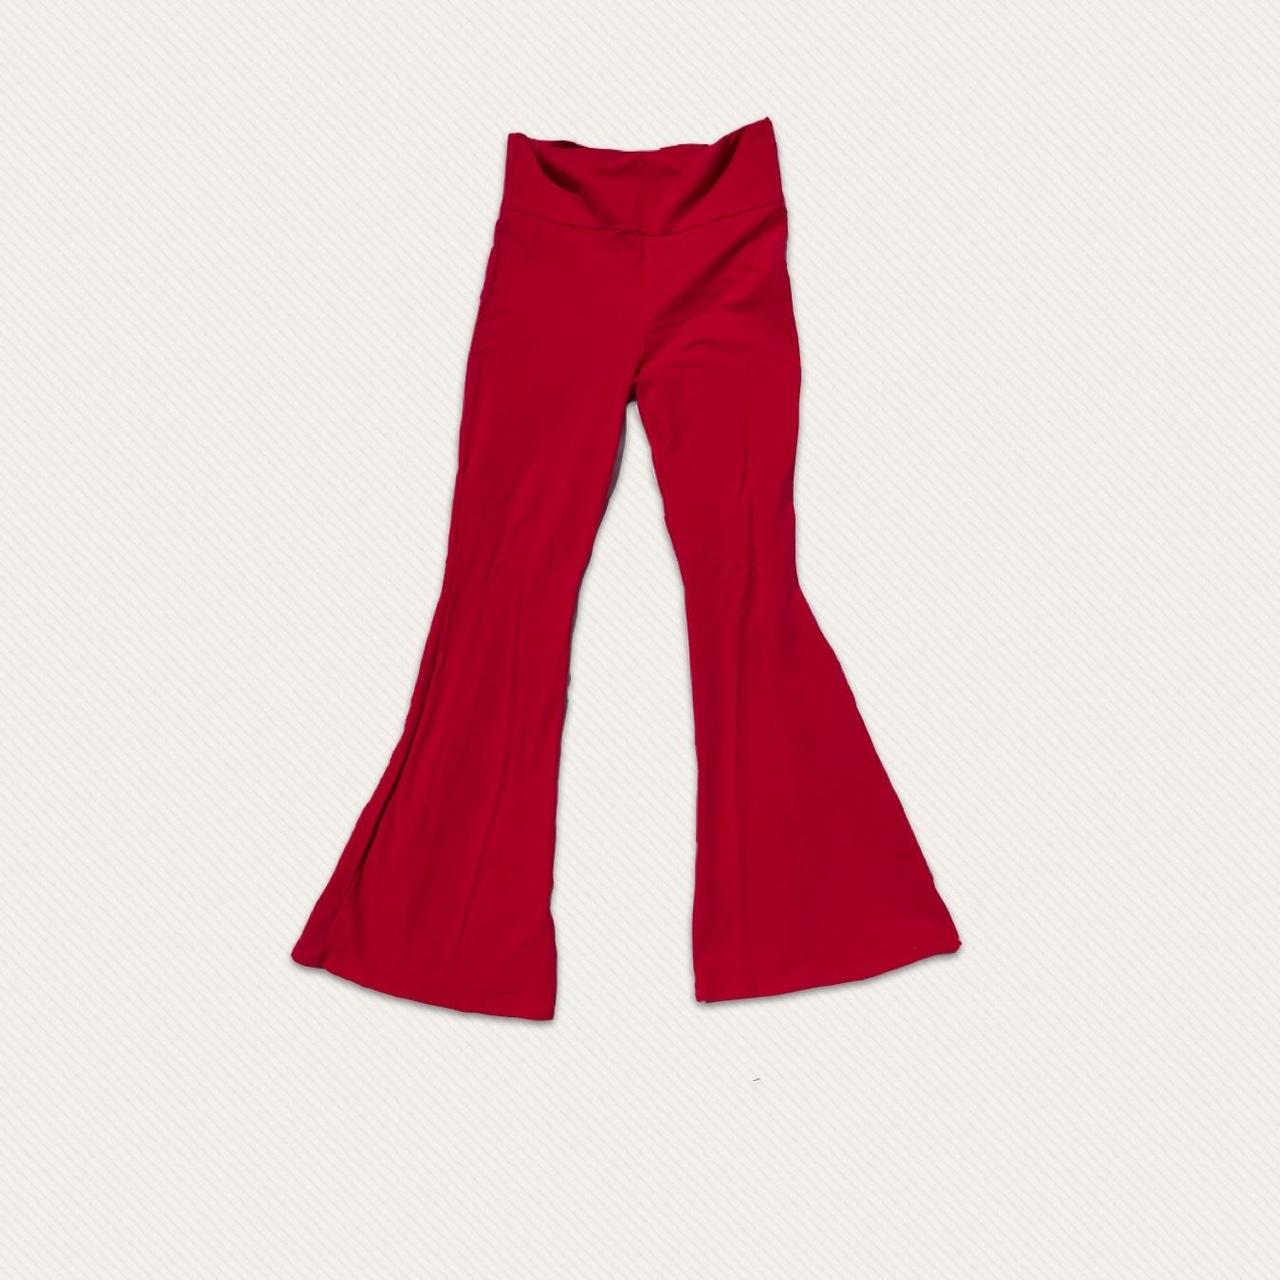 Red High Waist Flare Pant can be folded down for a - Depop